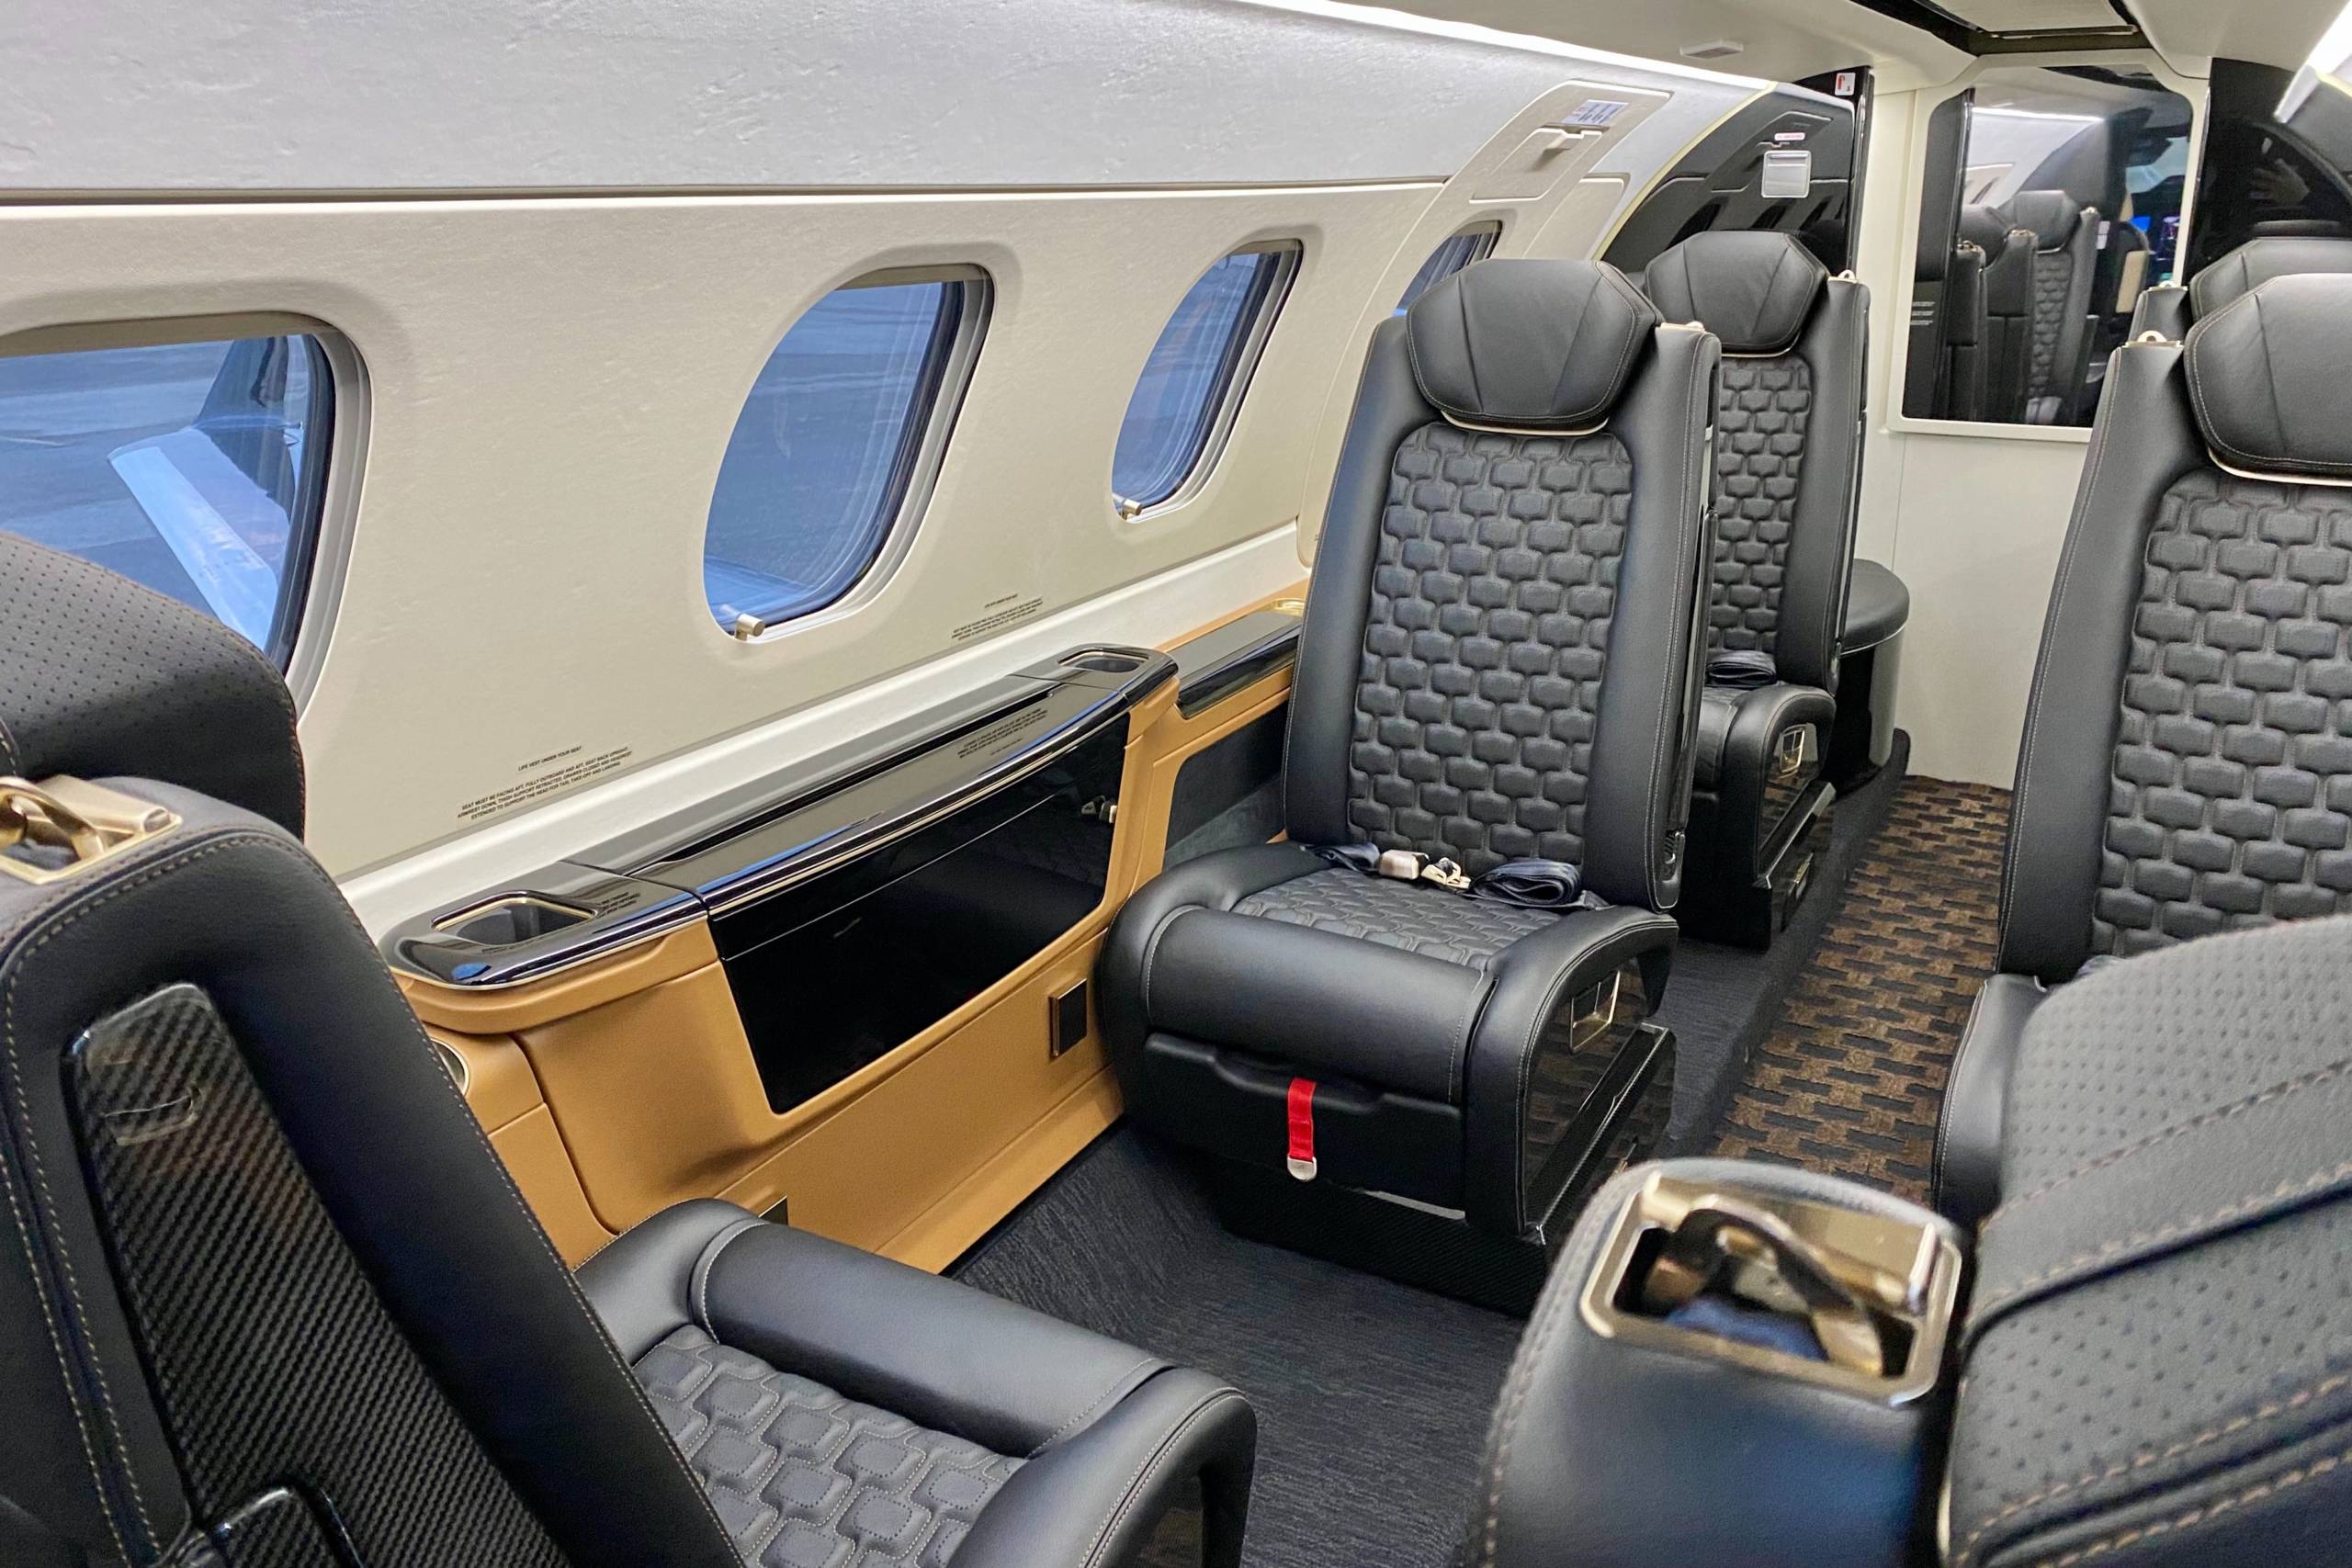 Flying Embraer's super posh, quiet $10 million private jet - Points Guy